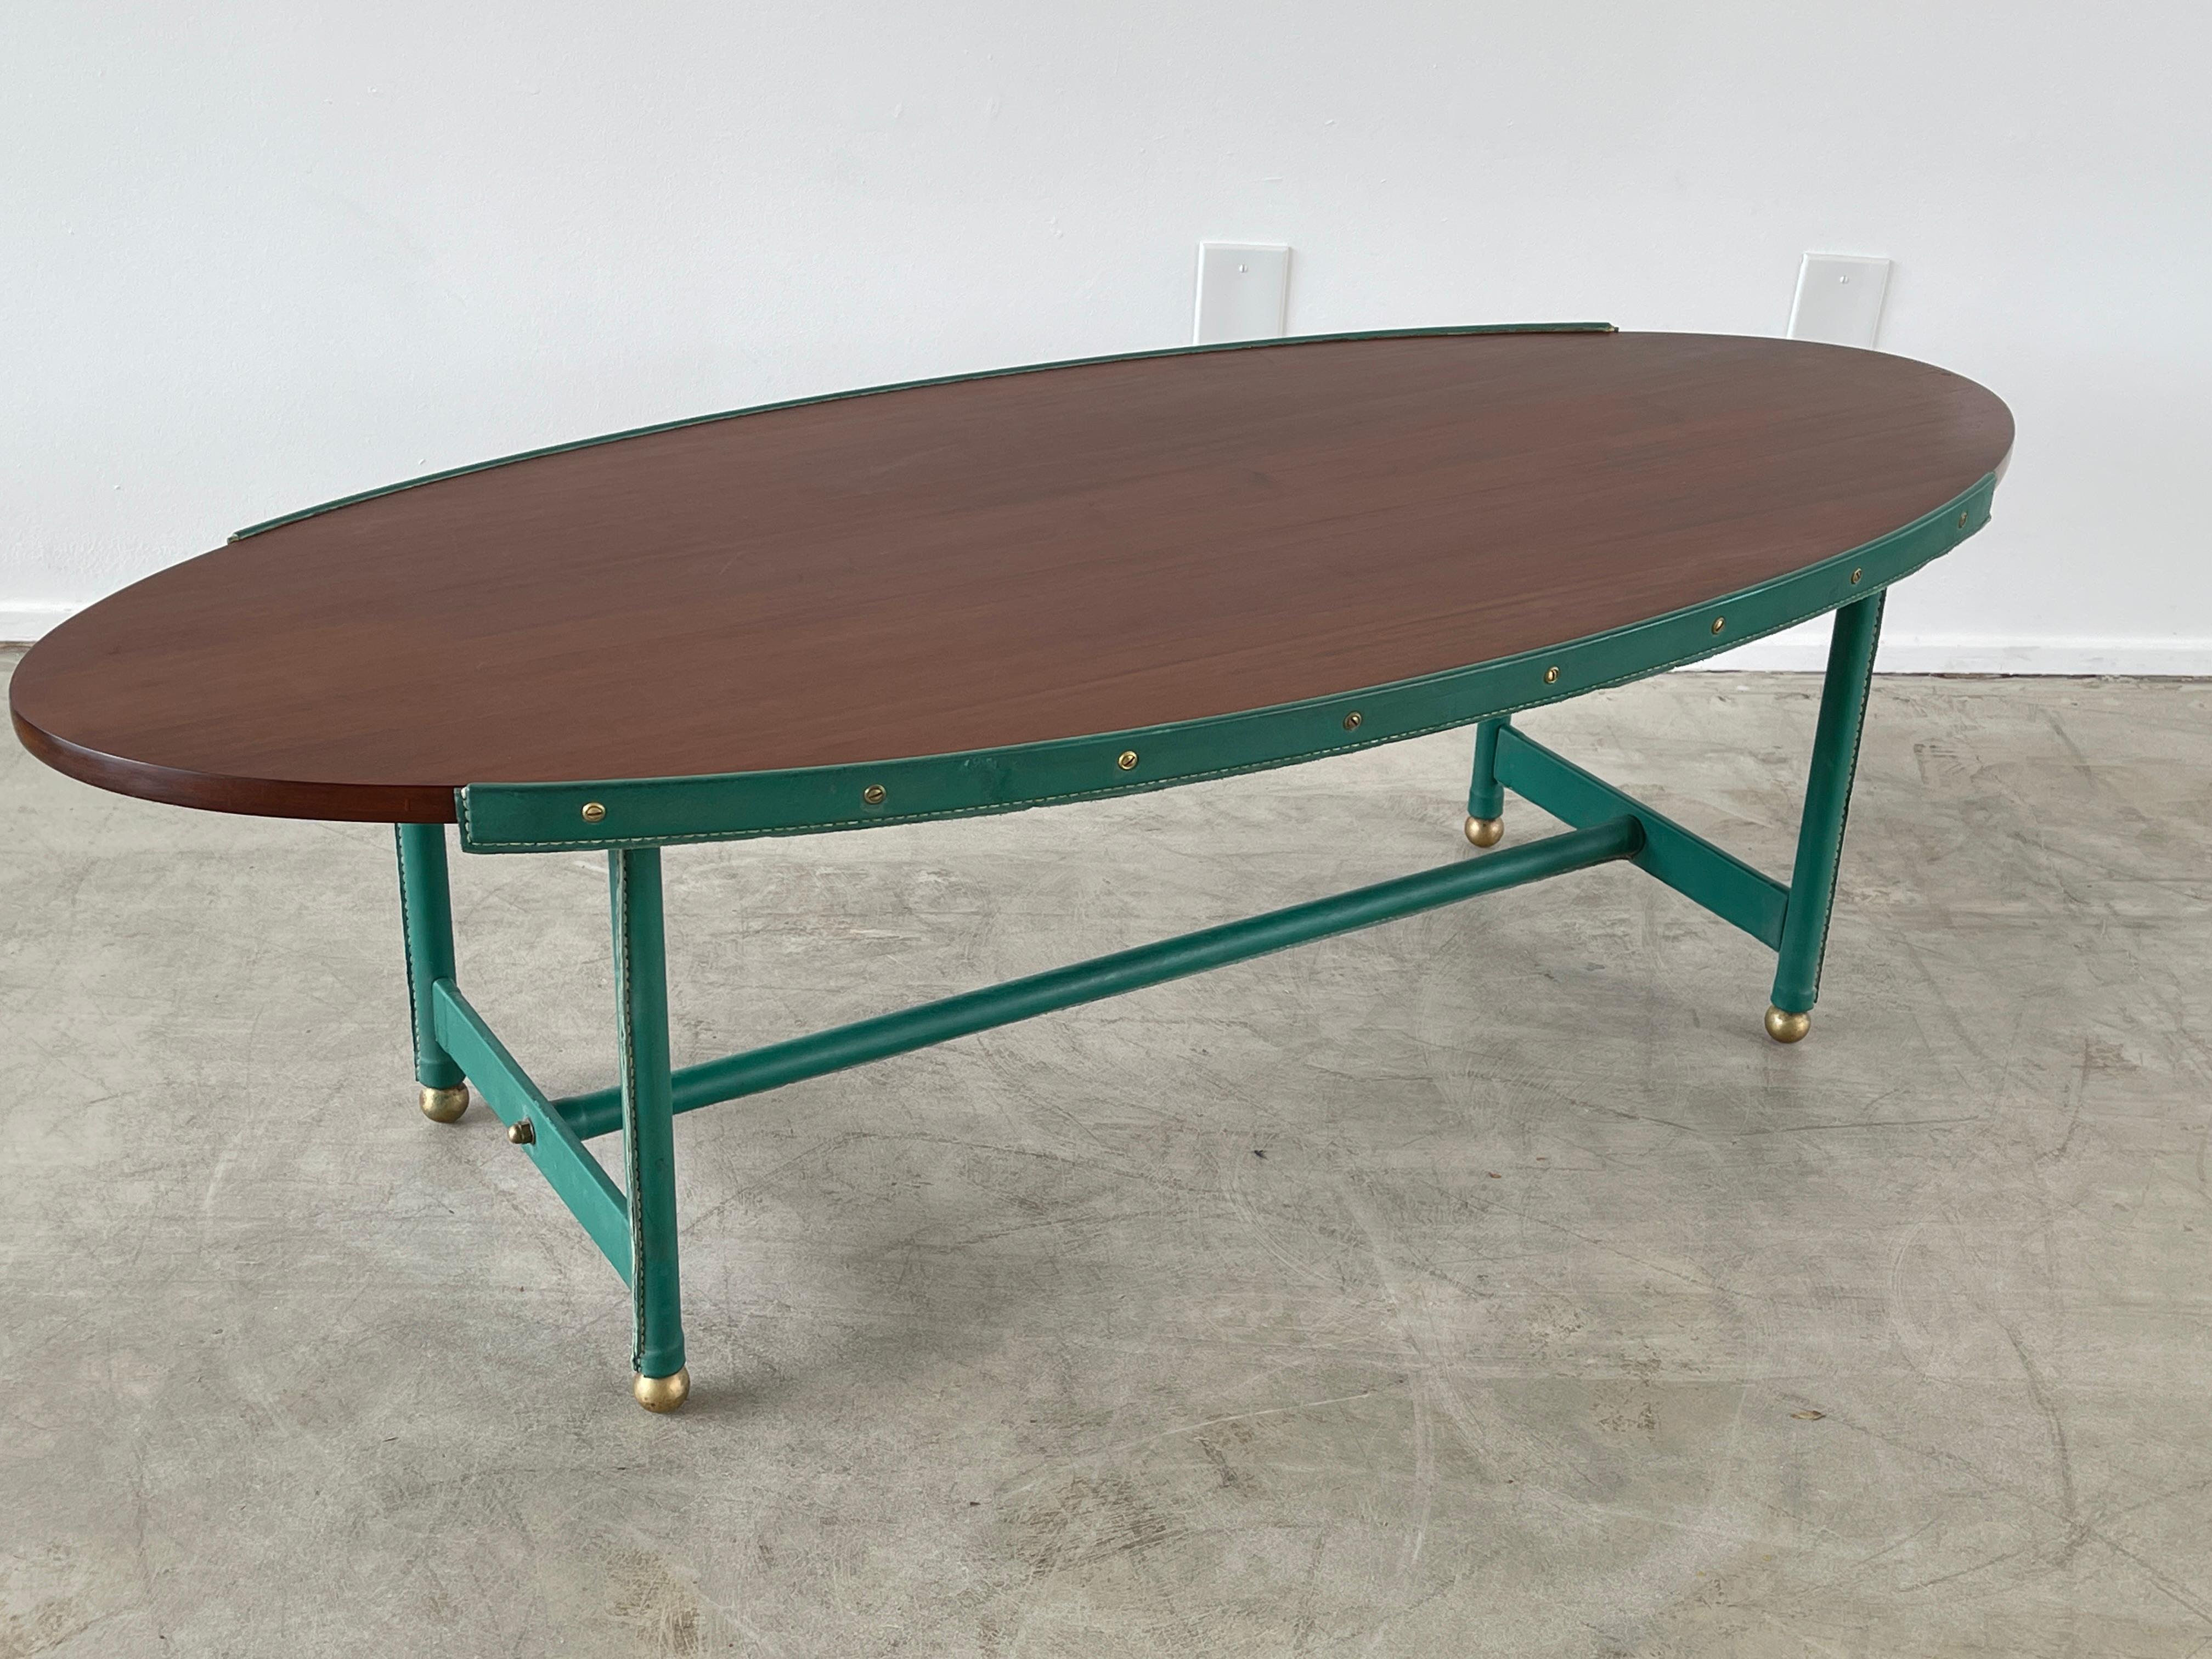 Rare Jacques Adnet elliptical shaped coffee table in original green leather / mahogany wood top and brass bamboo signature detailing and contrast stitching. 
Incredible piece.